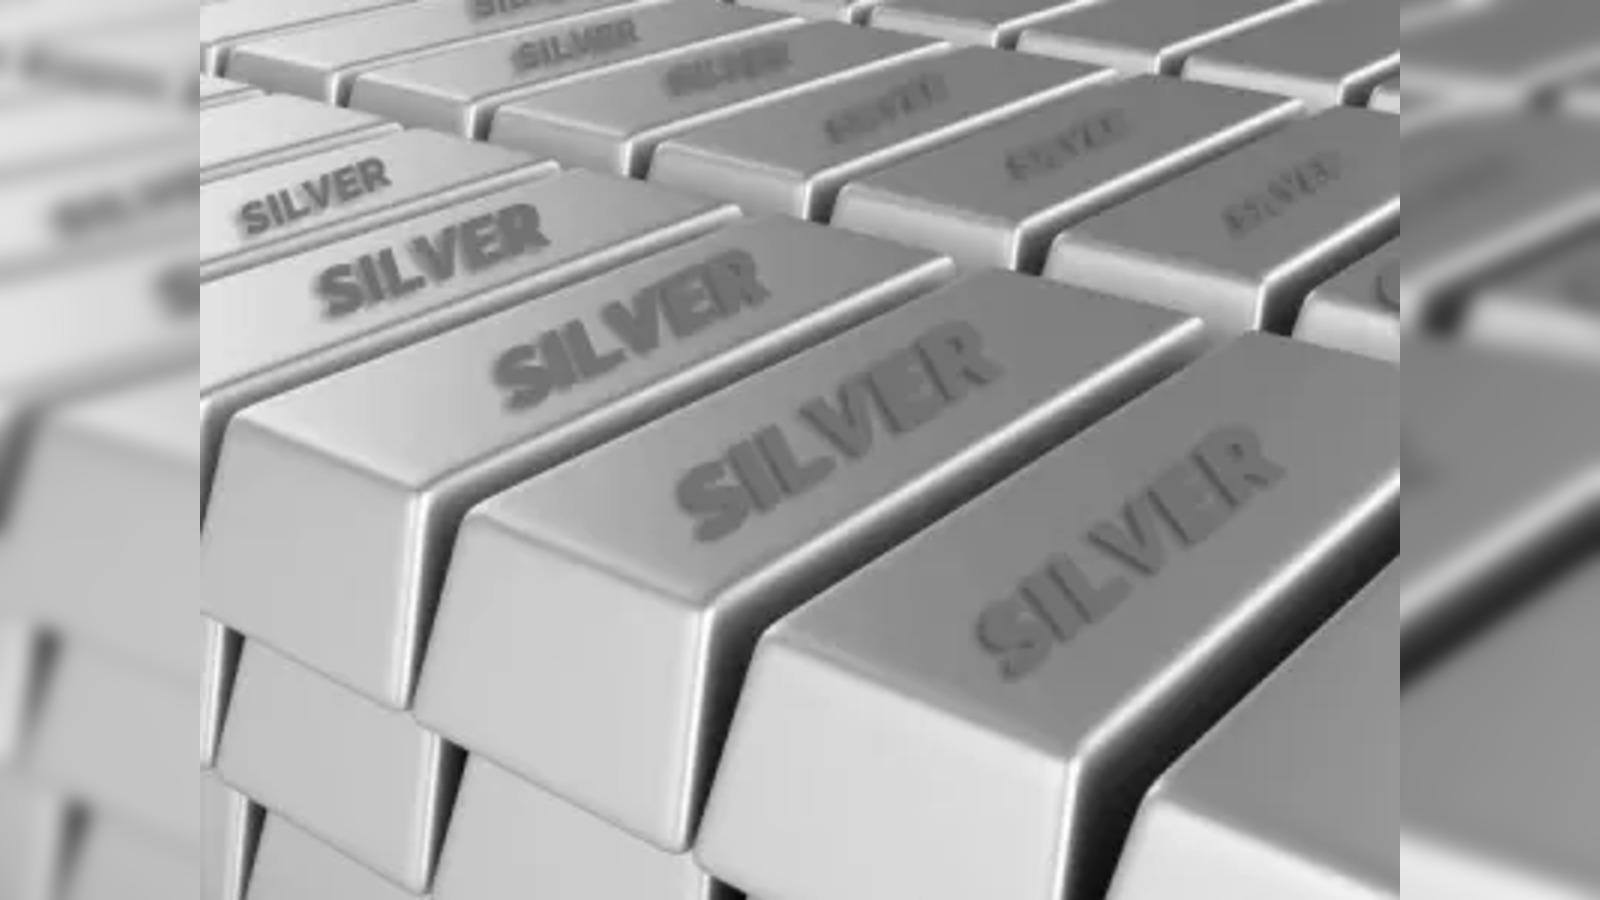 silver investment: Is silver the new gold? Key triggers to watch in  precious metals - The Economic Times